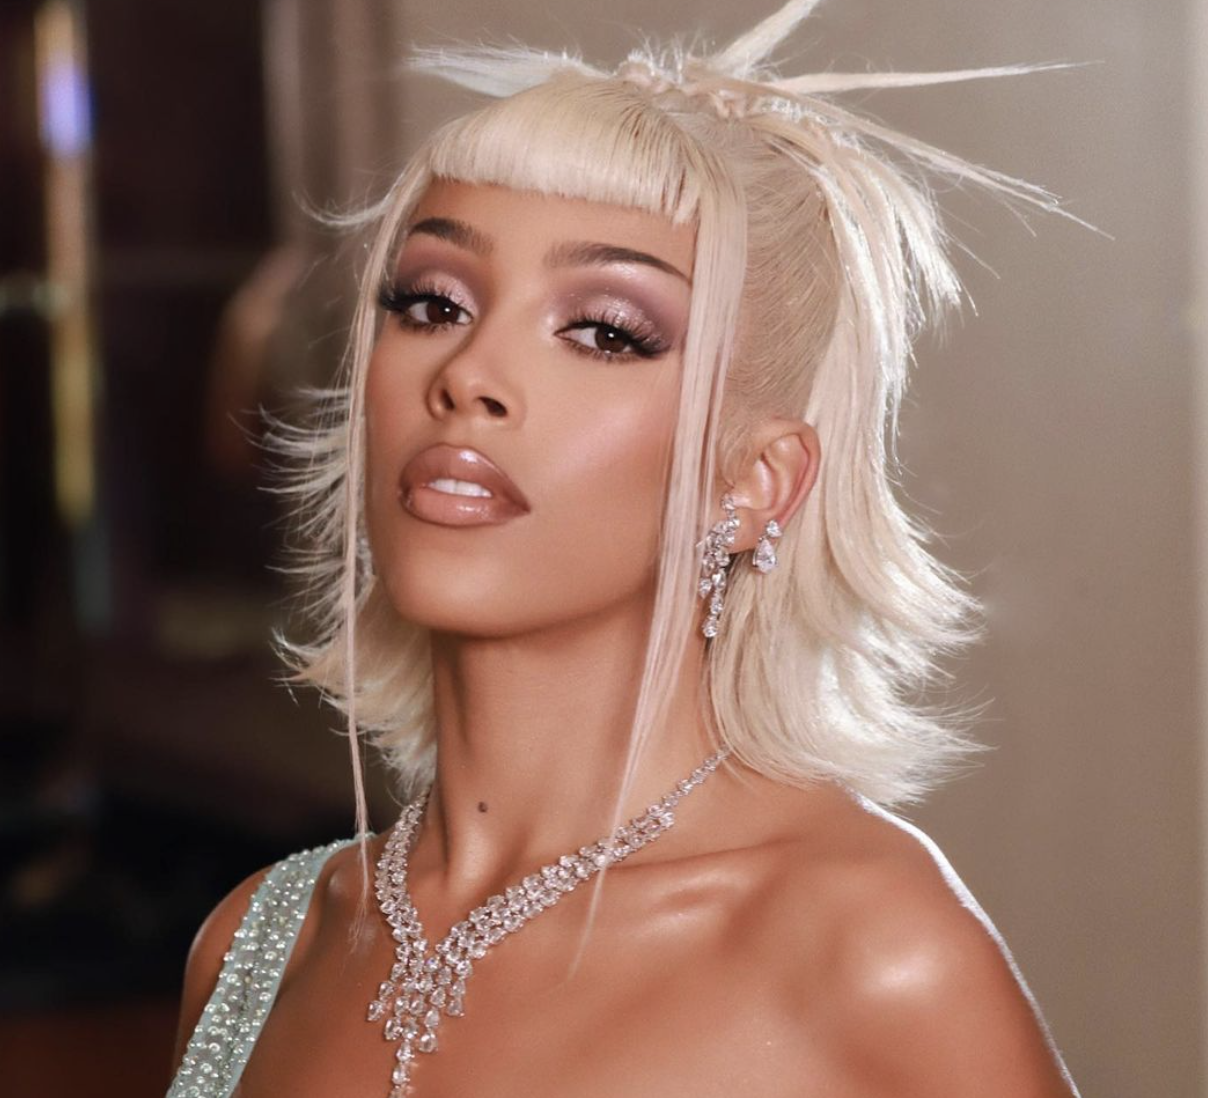 How To Recreate Doja Cat’s Nostalgic, Blonde Hairstyle From The Grammys